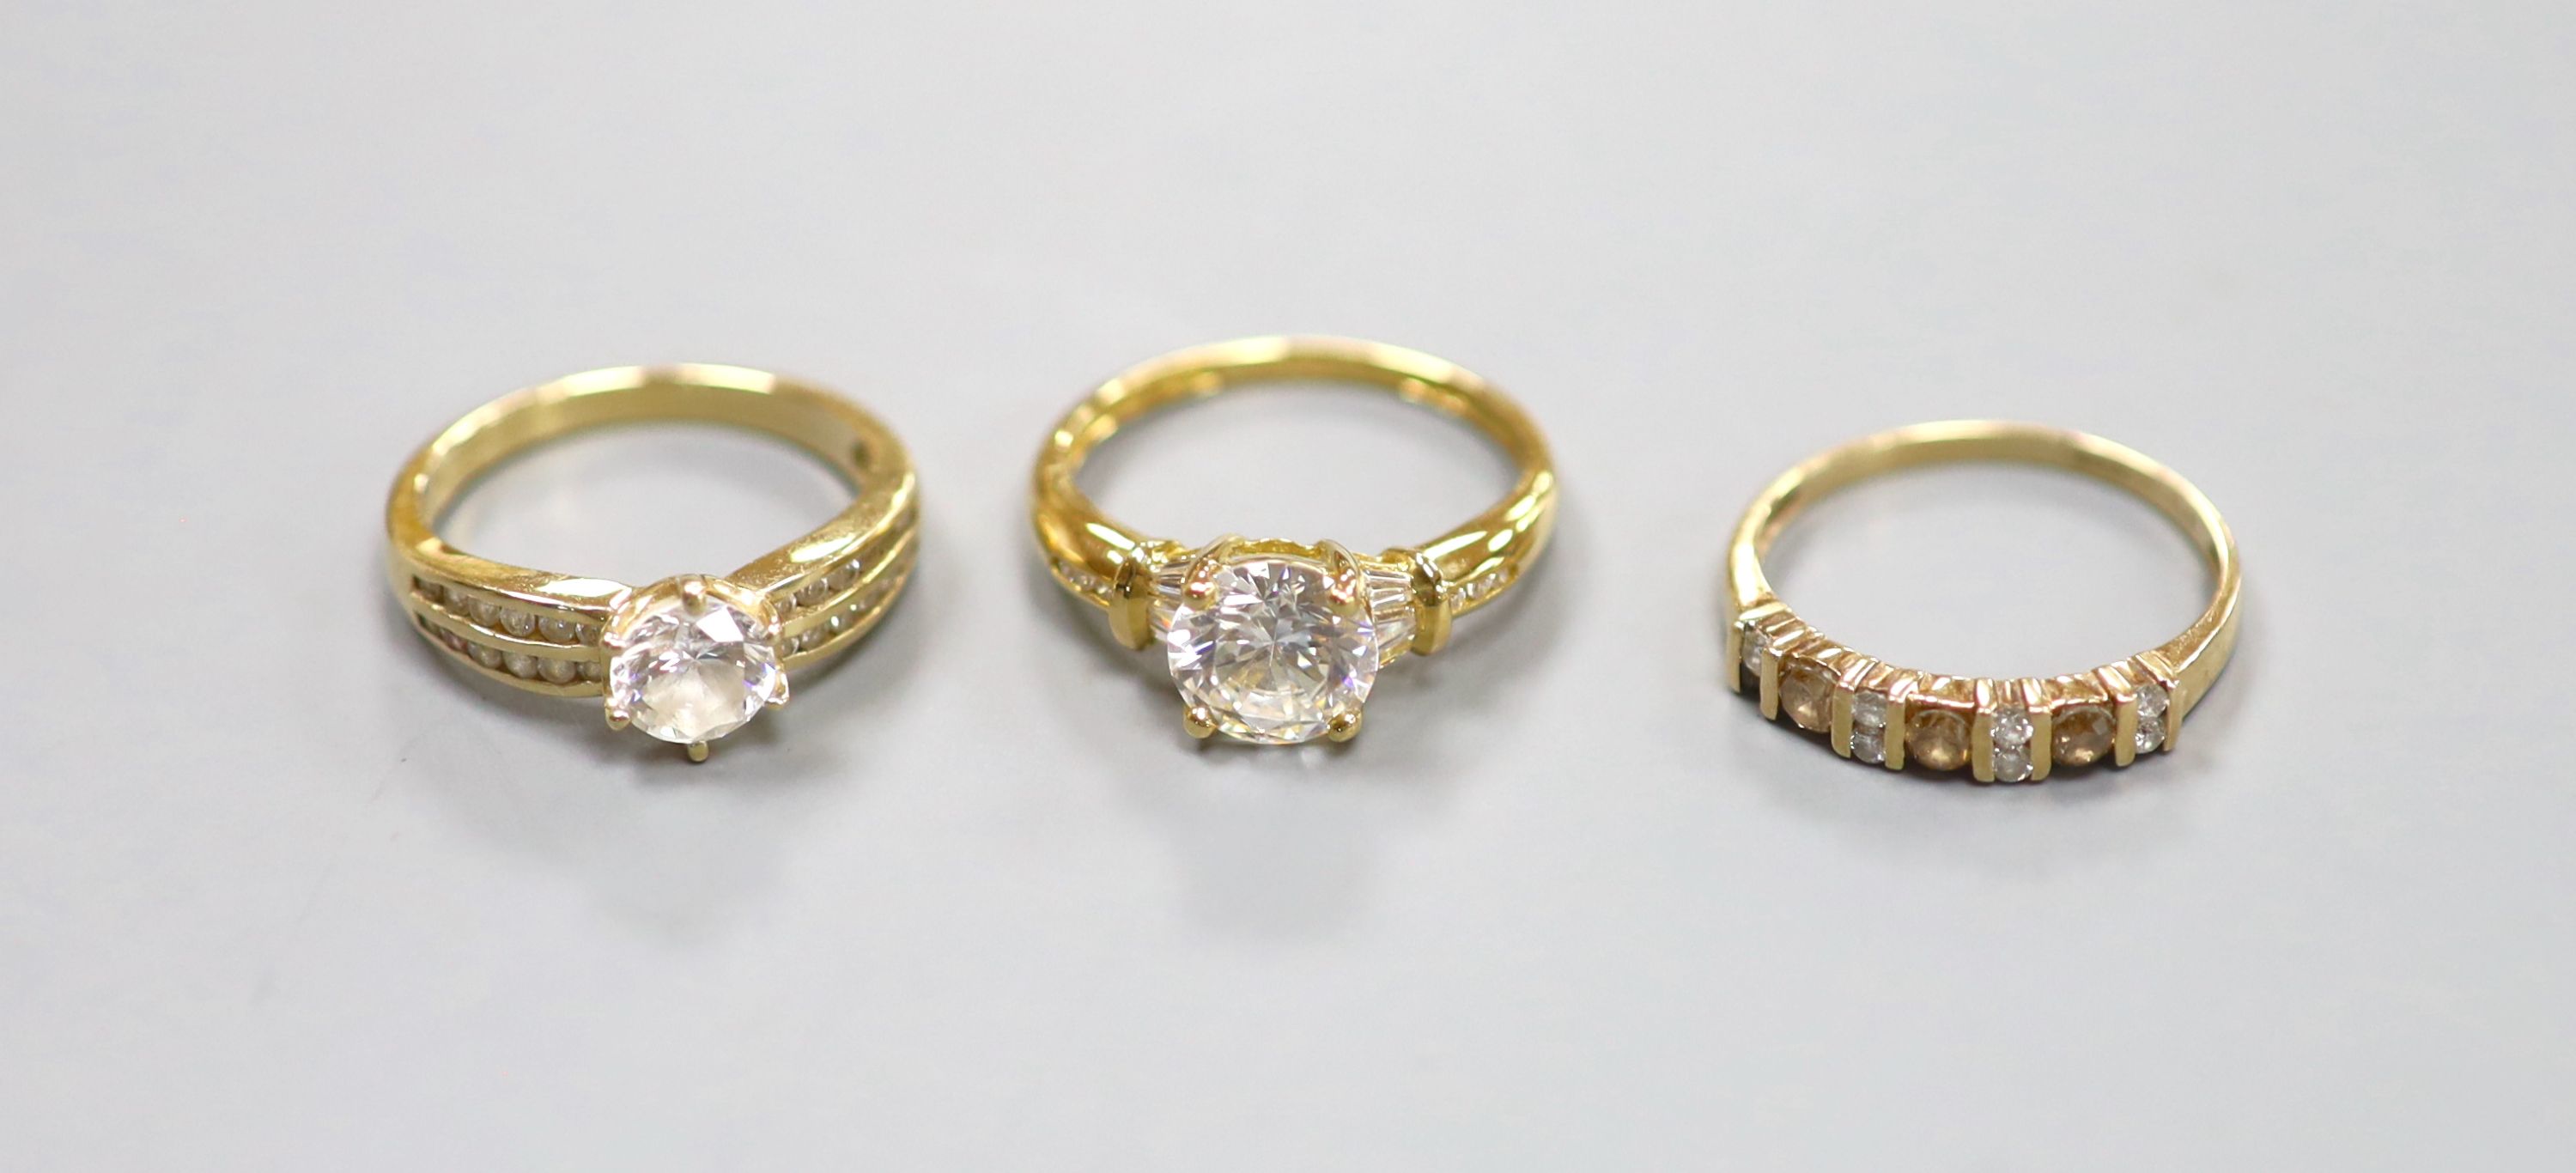 An 18ct gold paste-set solitaire ring, a similar 14ct gold ring and a 9ct gold, diamond and gem-set ring